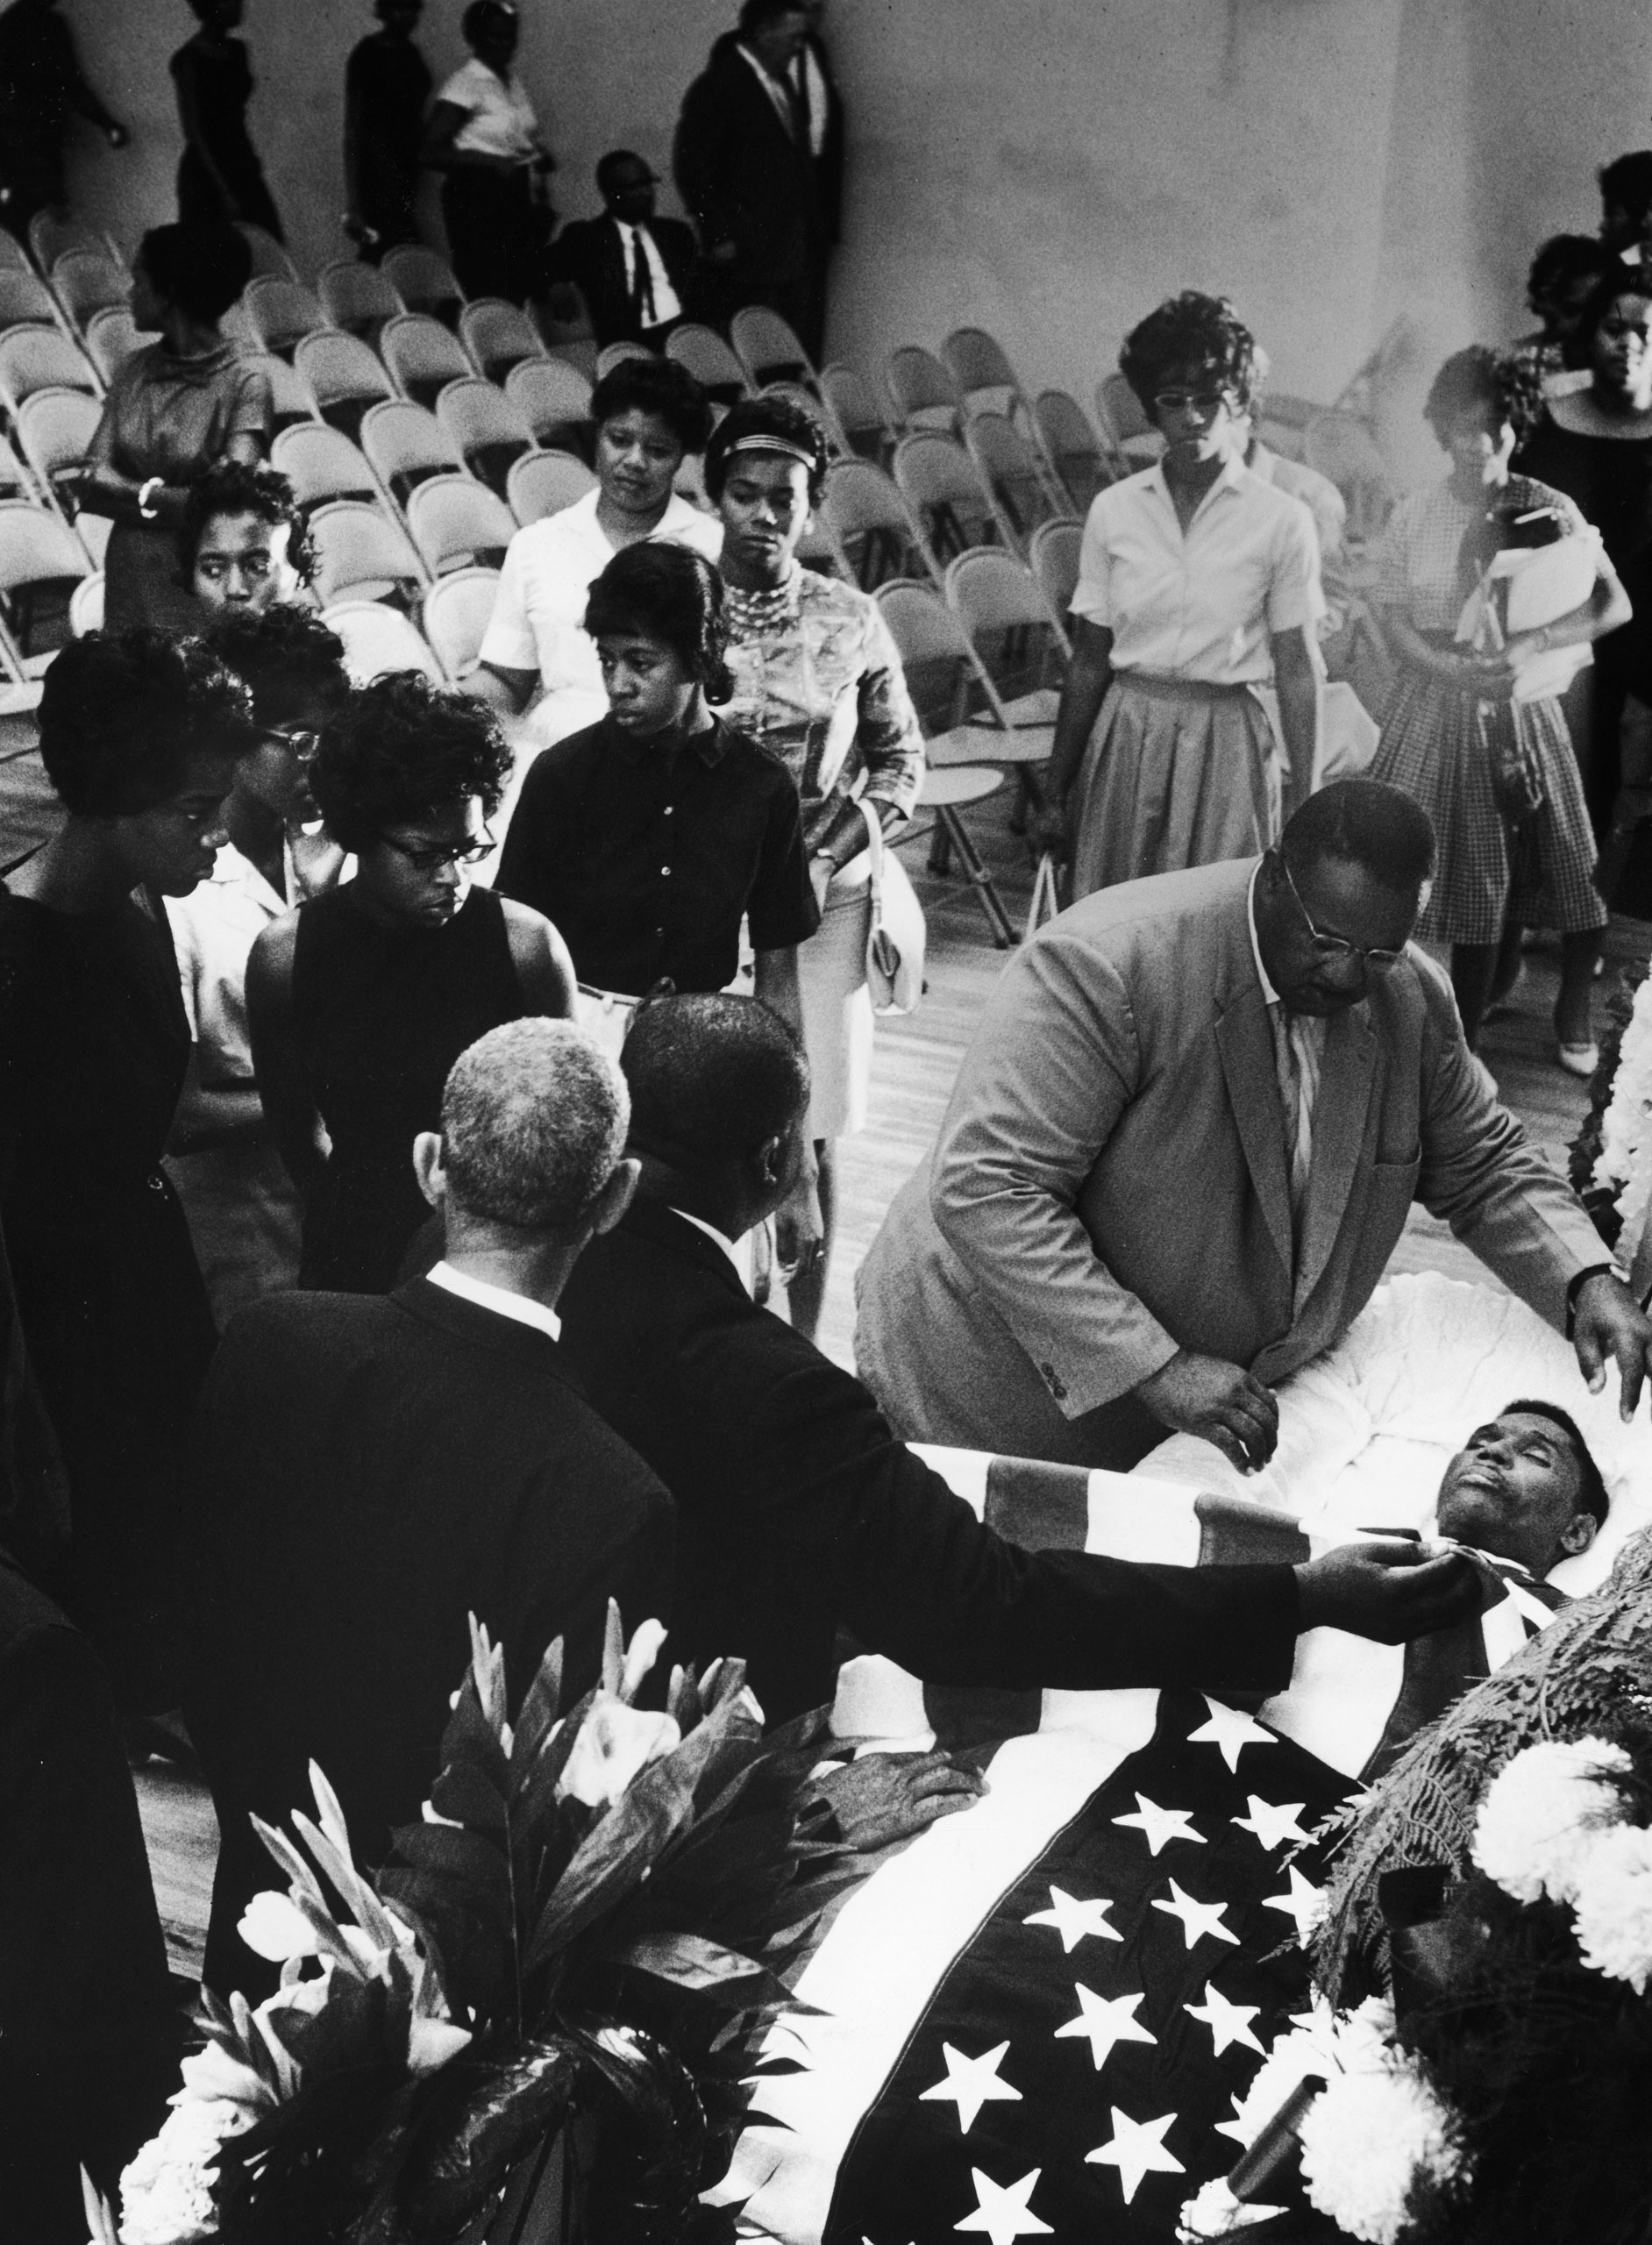 Mourners bid farewell to slain NAACP official Medgar Evers at his funeral, Jackson, Miss., June 15, 1963.